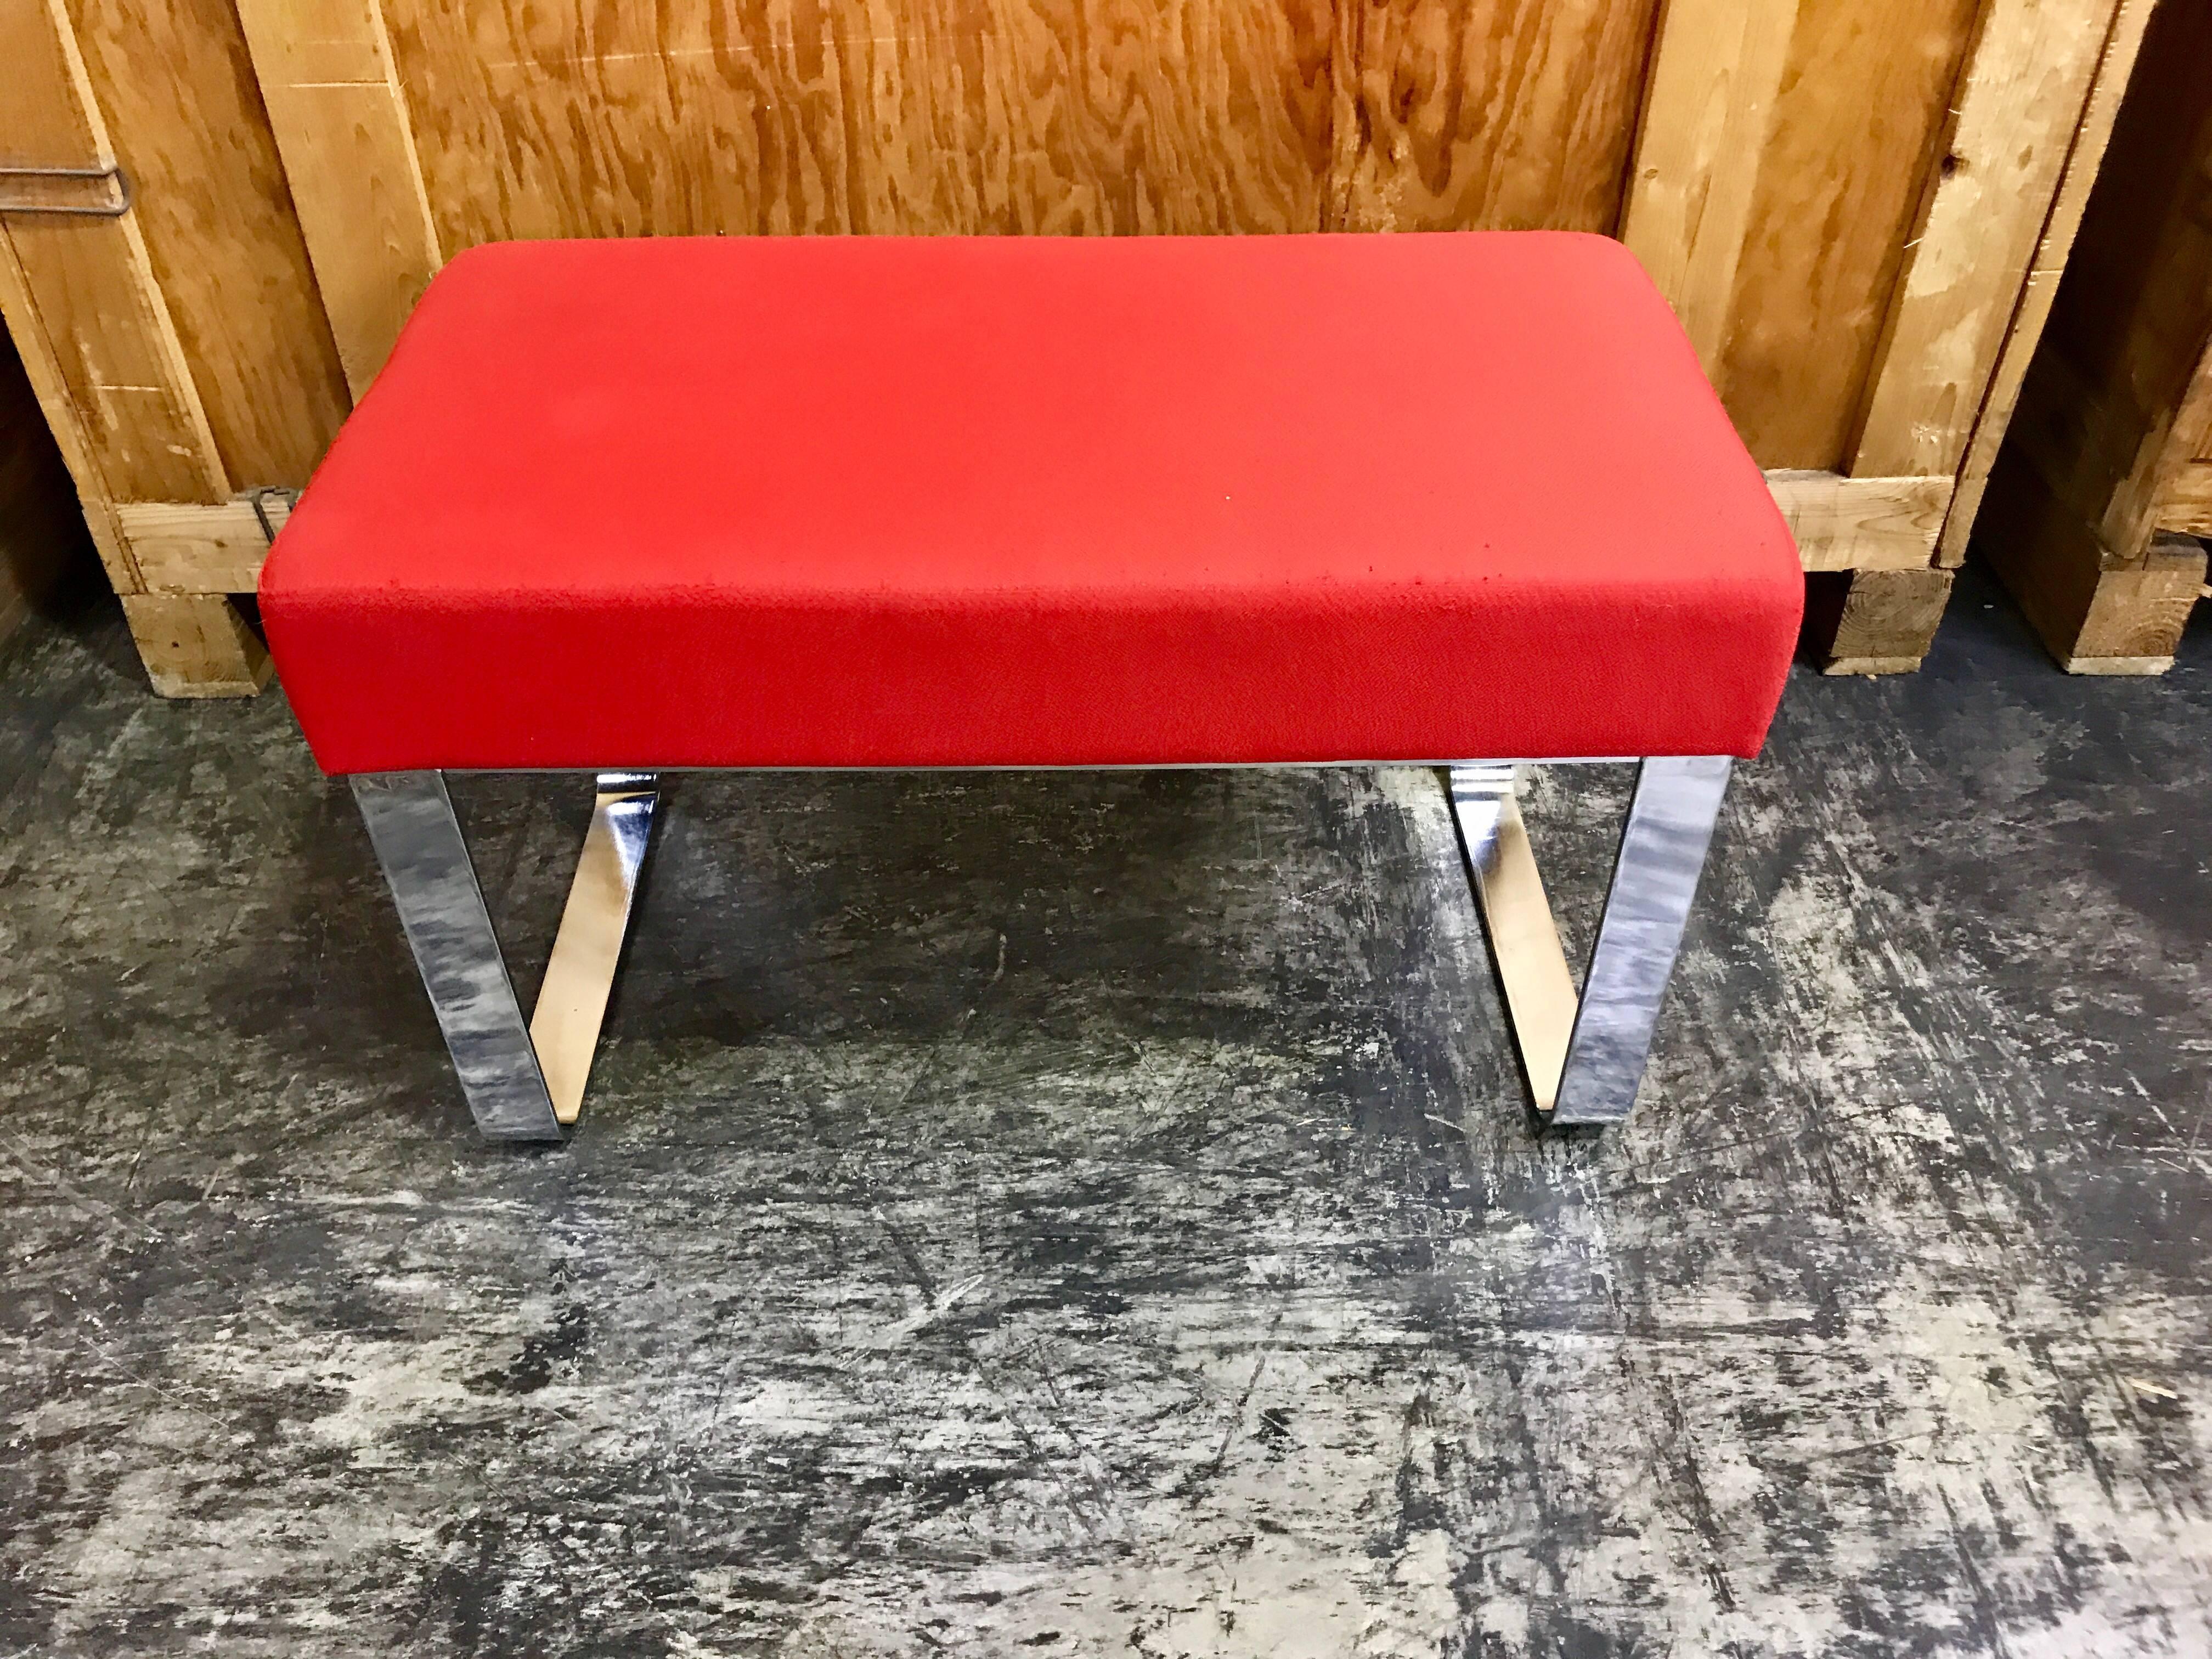 Classic Milo Baughman chrome bench, of rectangular form, vintage red upholstered top shows signs of wear, ready for re-upholstery in the fabric of your choice. Raised on a heavy duty bright chrome frame.